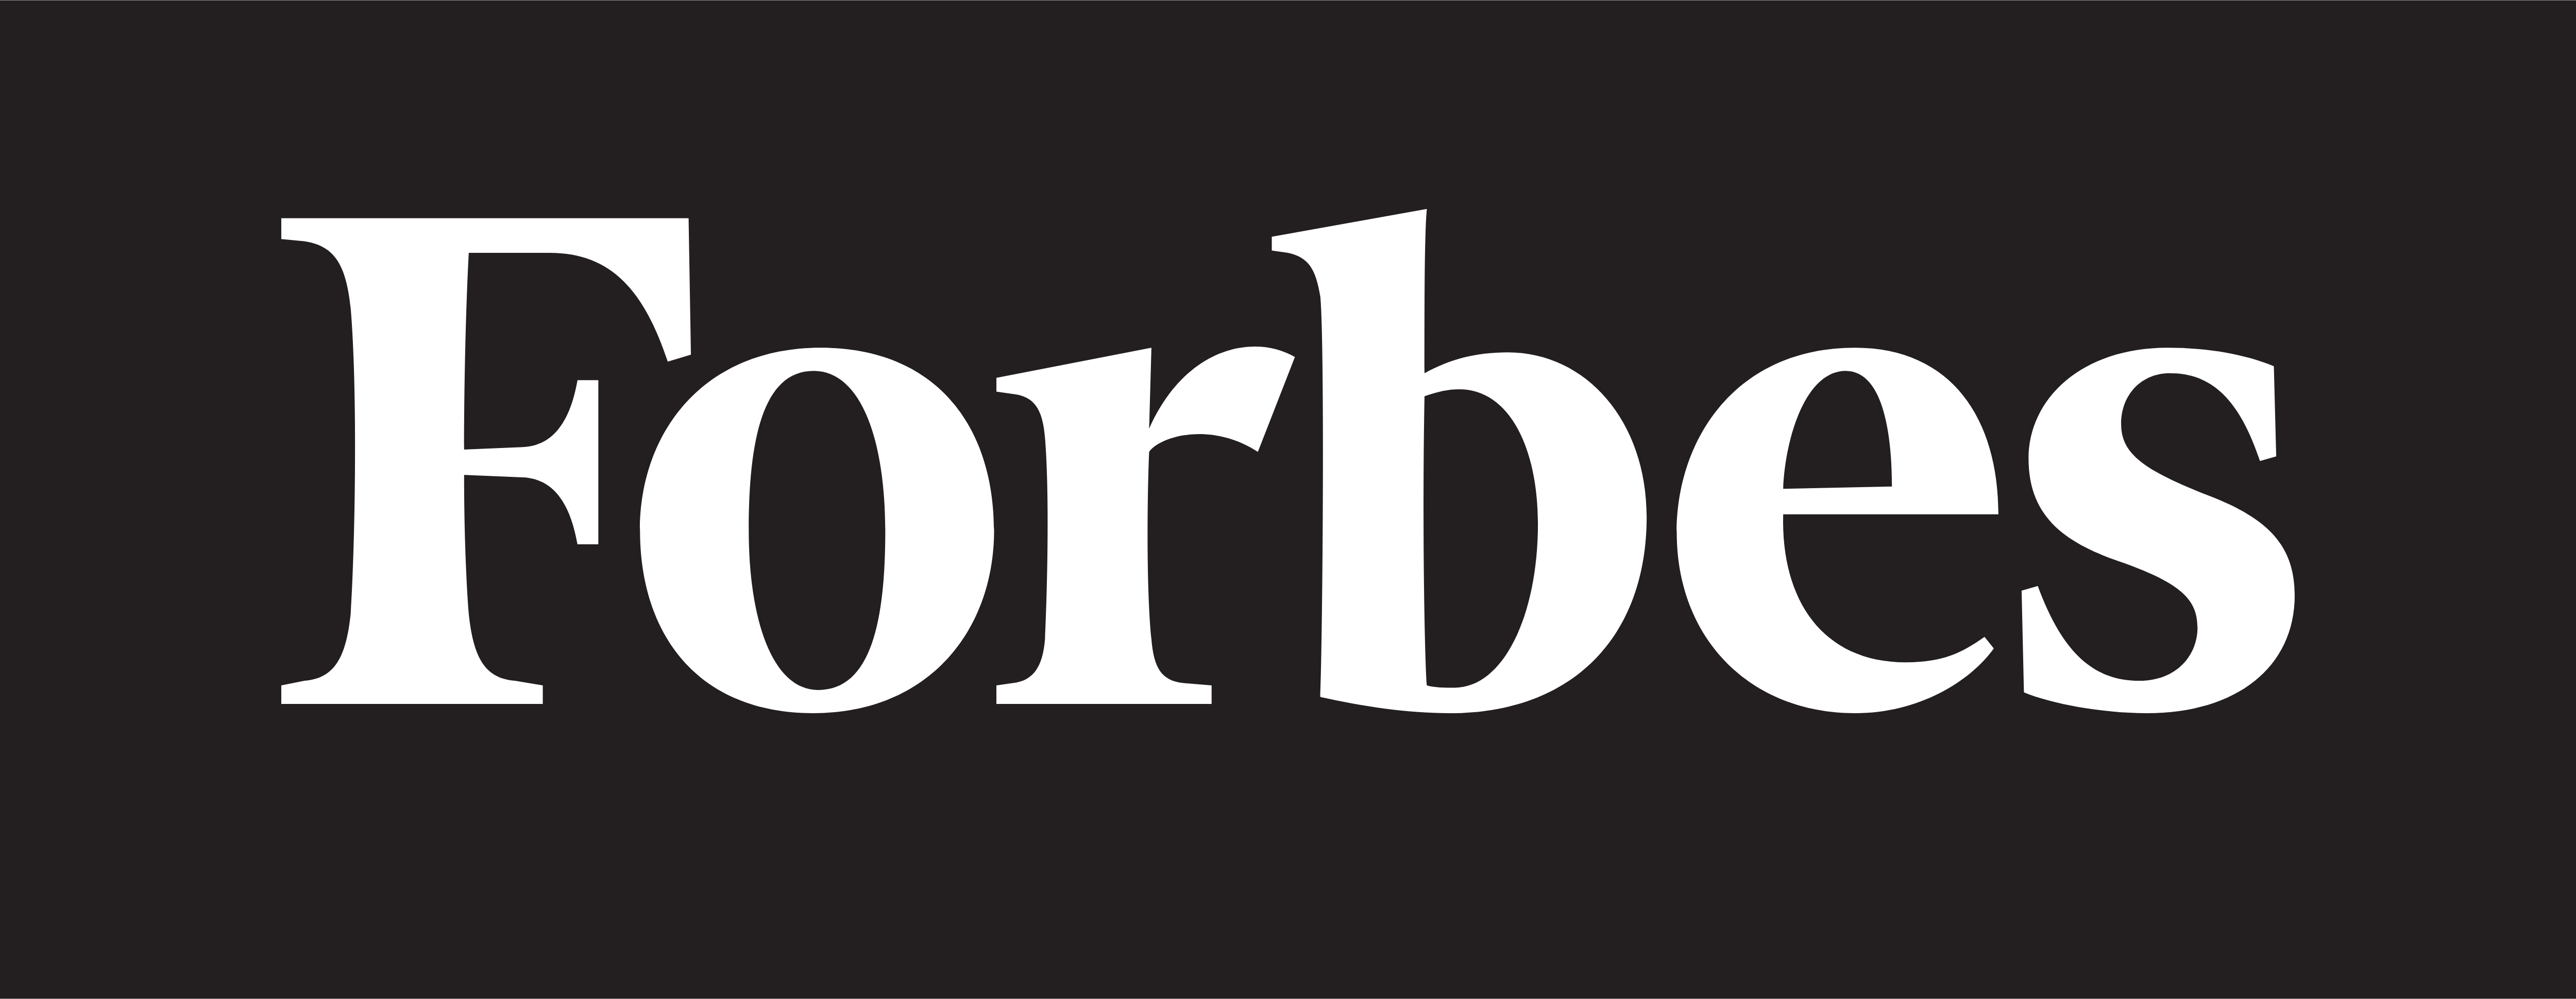 Forbes Article